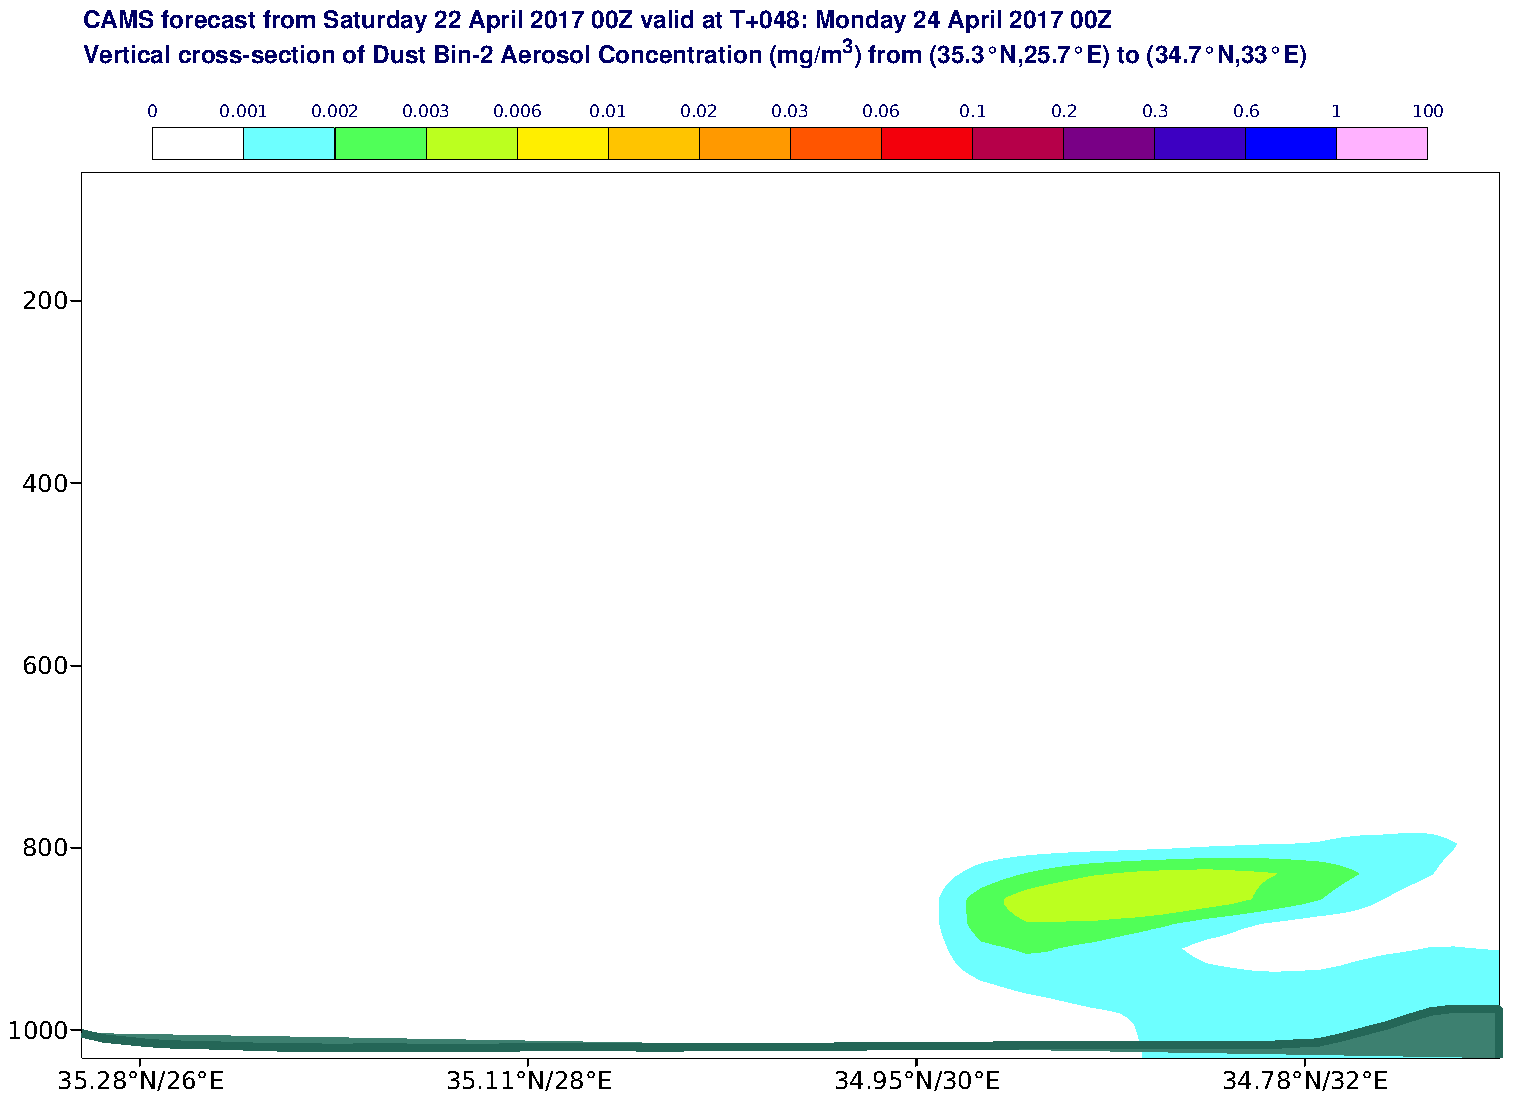 Vertical cross-section of Dust Bin-2 Aerosol Concentration (mg/m3) valid at T48 - 2017-04-24 00:00